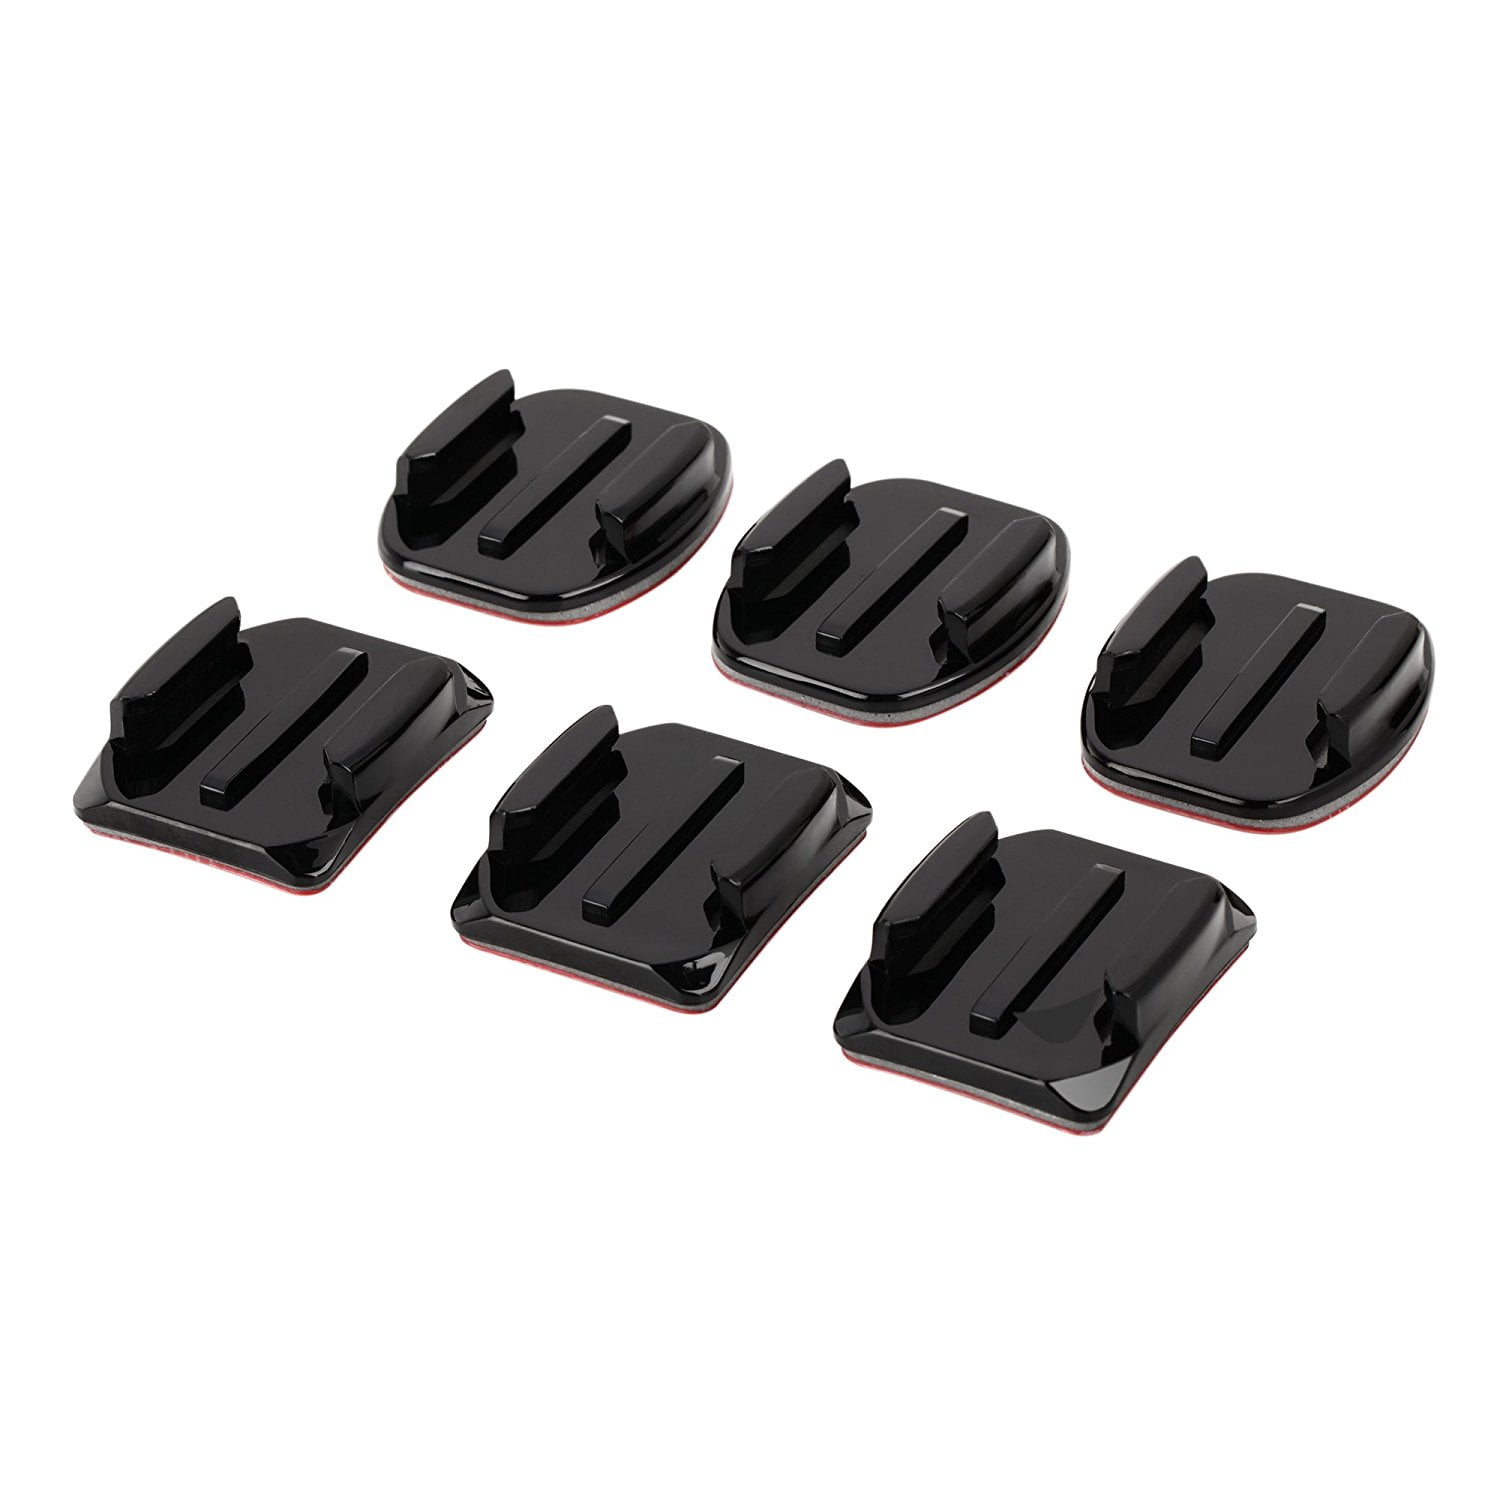 GoPro Flat Curved Adhesive Mount AACFT-001 for All GoPro HERO7 HERO6 HERO5 